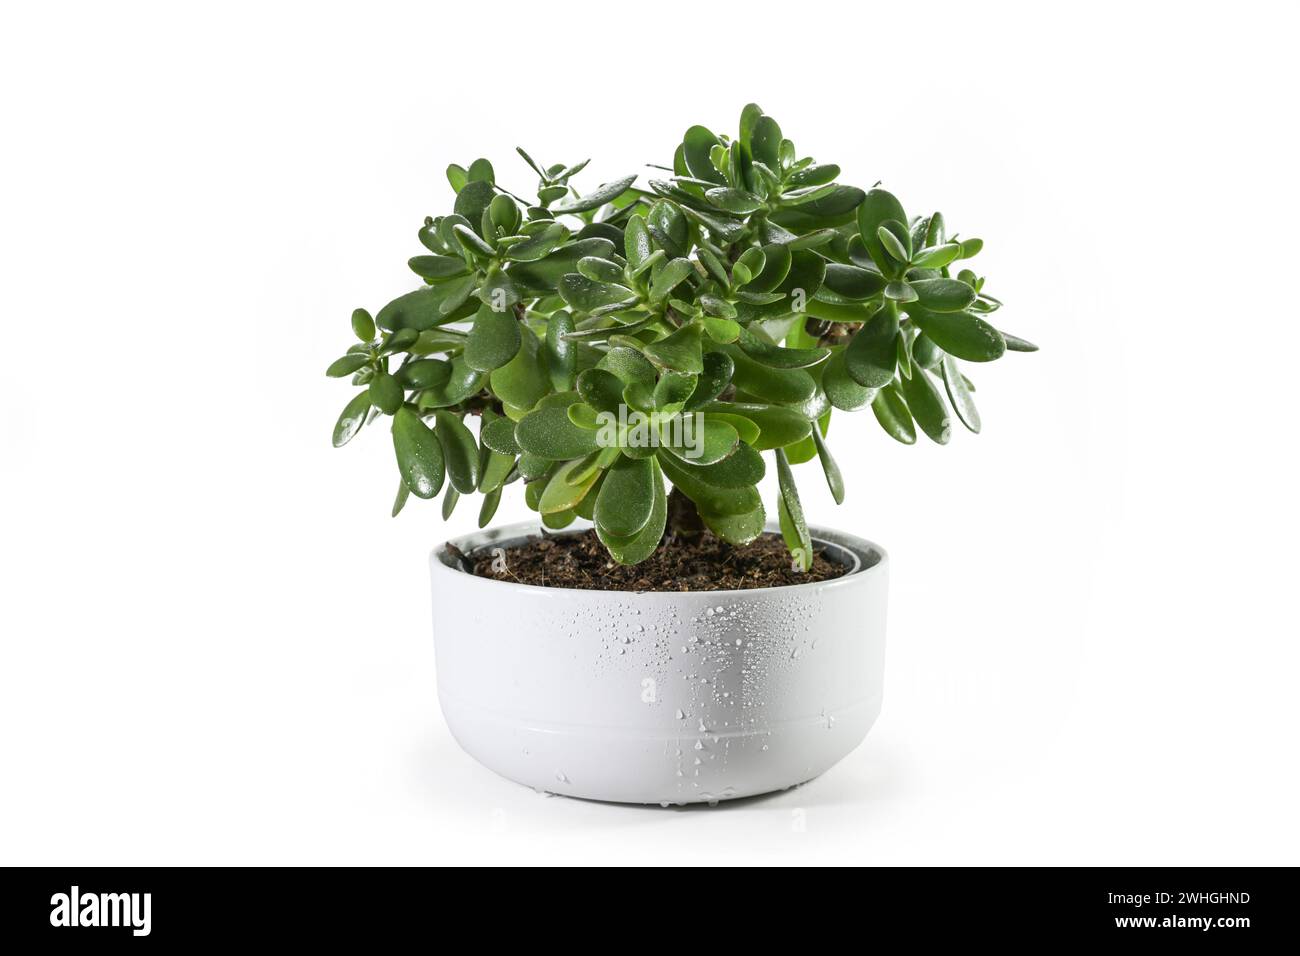 Money tree (Crassula ovata) succulent plant with thick leaves potted as decorative houseplant in a wide ceramic planter, isolate Stock Photo